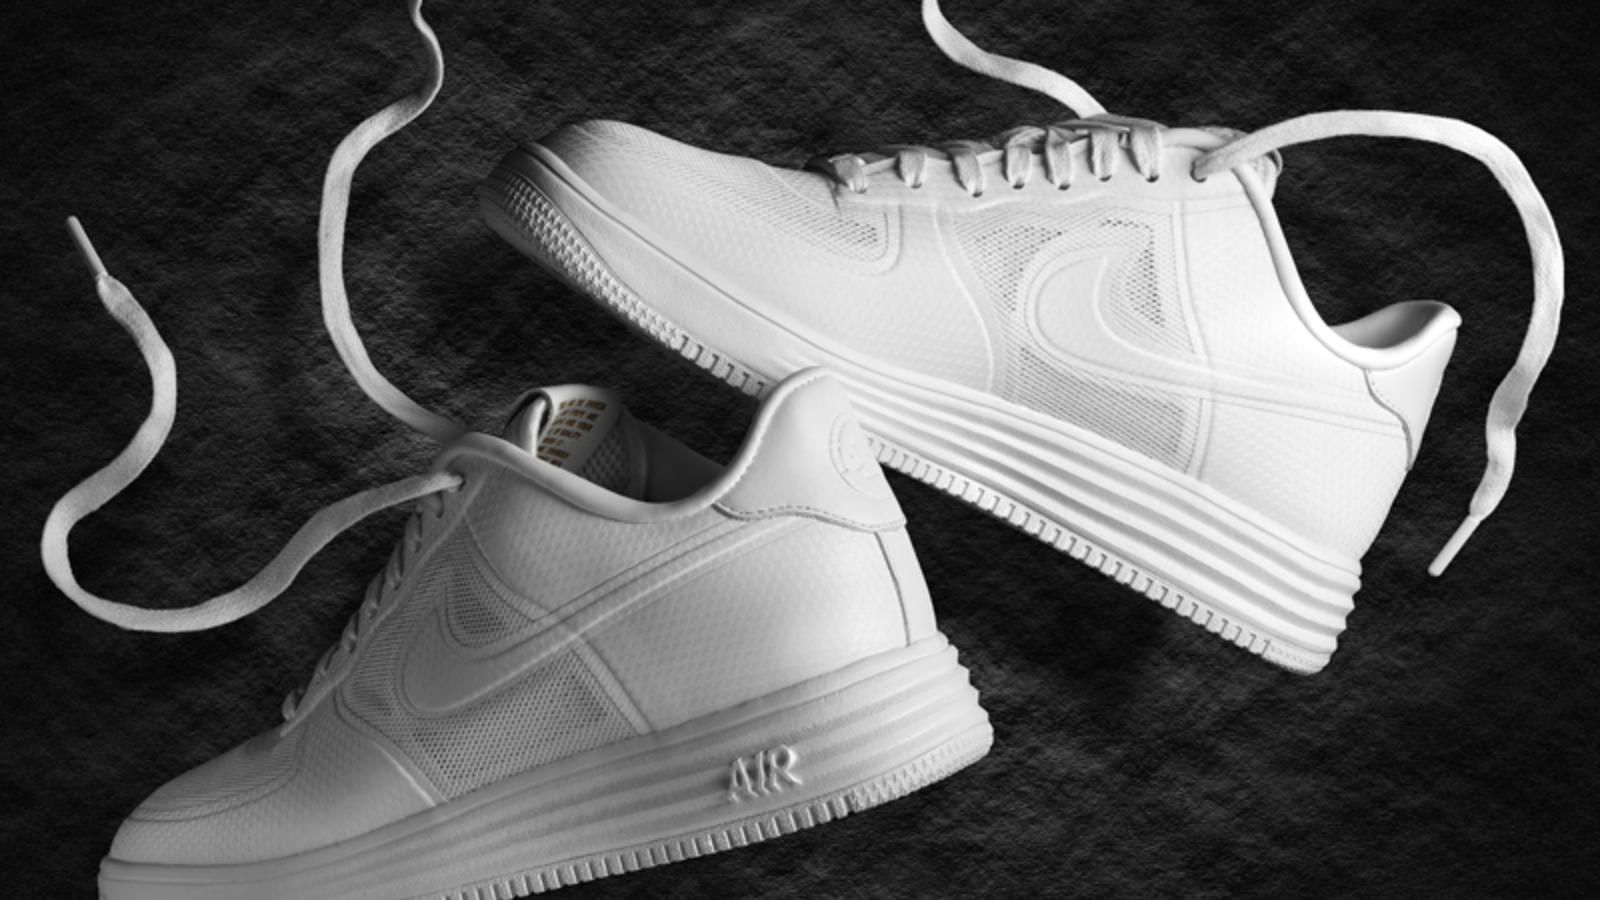 Nike Air Force 1 Iphone Wallpapers